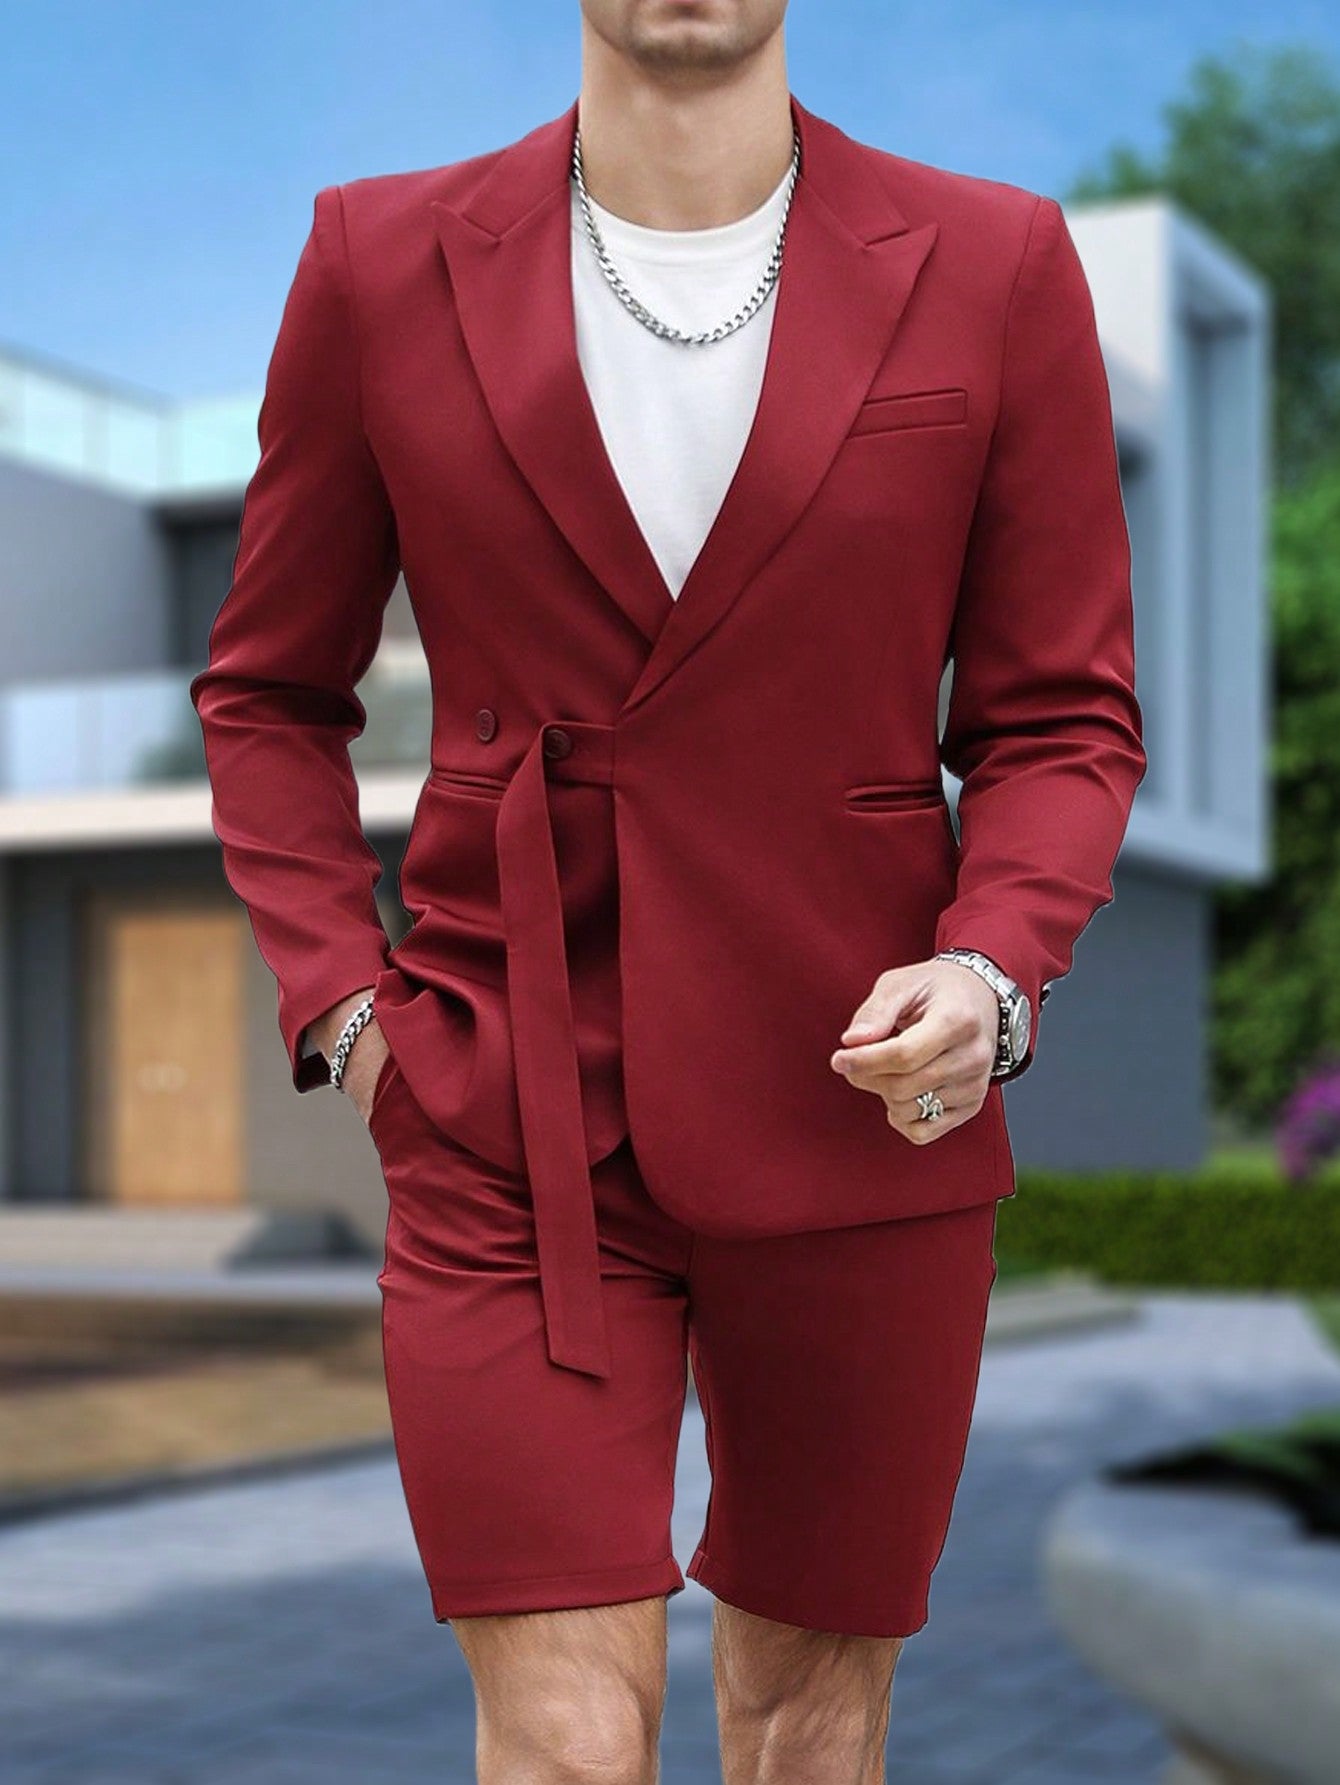 Men's Solid Color Long Sleeve Suit Jacket And Shorts Set